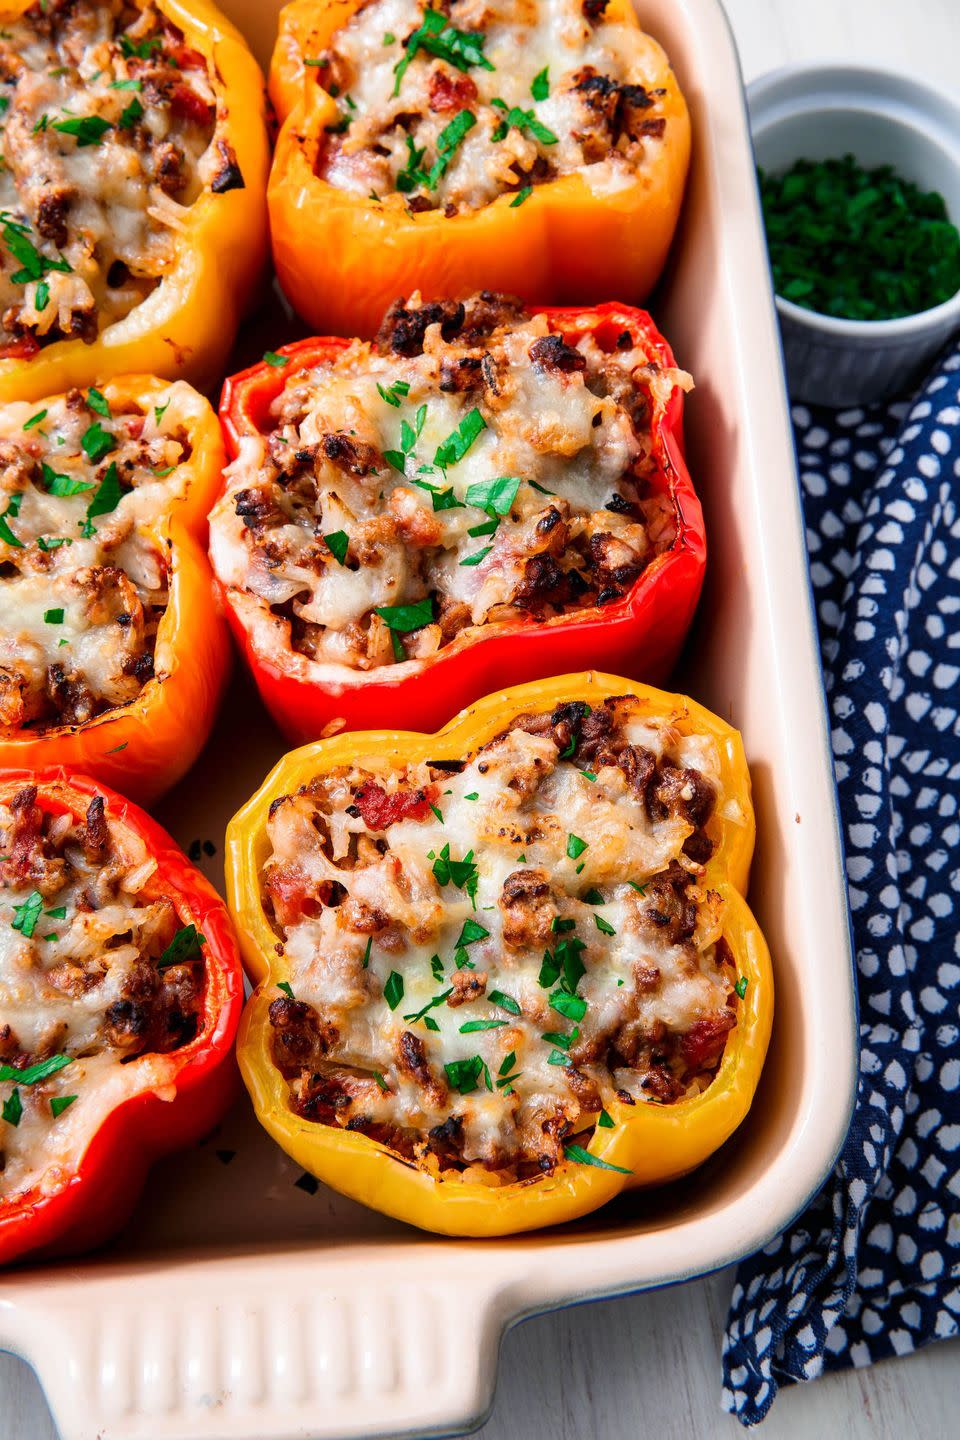 80 Easy Ground Beef Recipes That Taste Great But Are So Simple